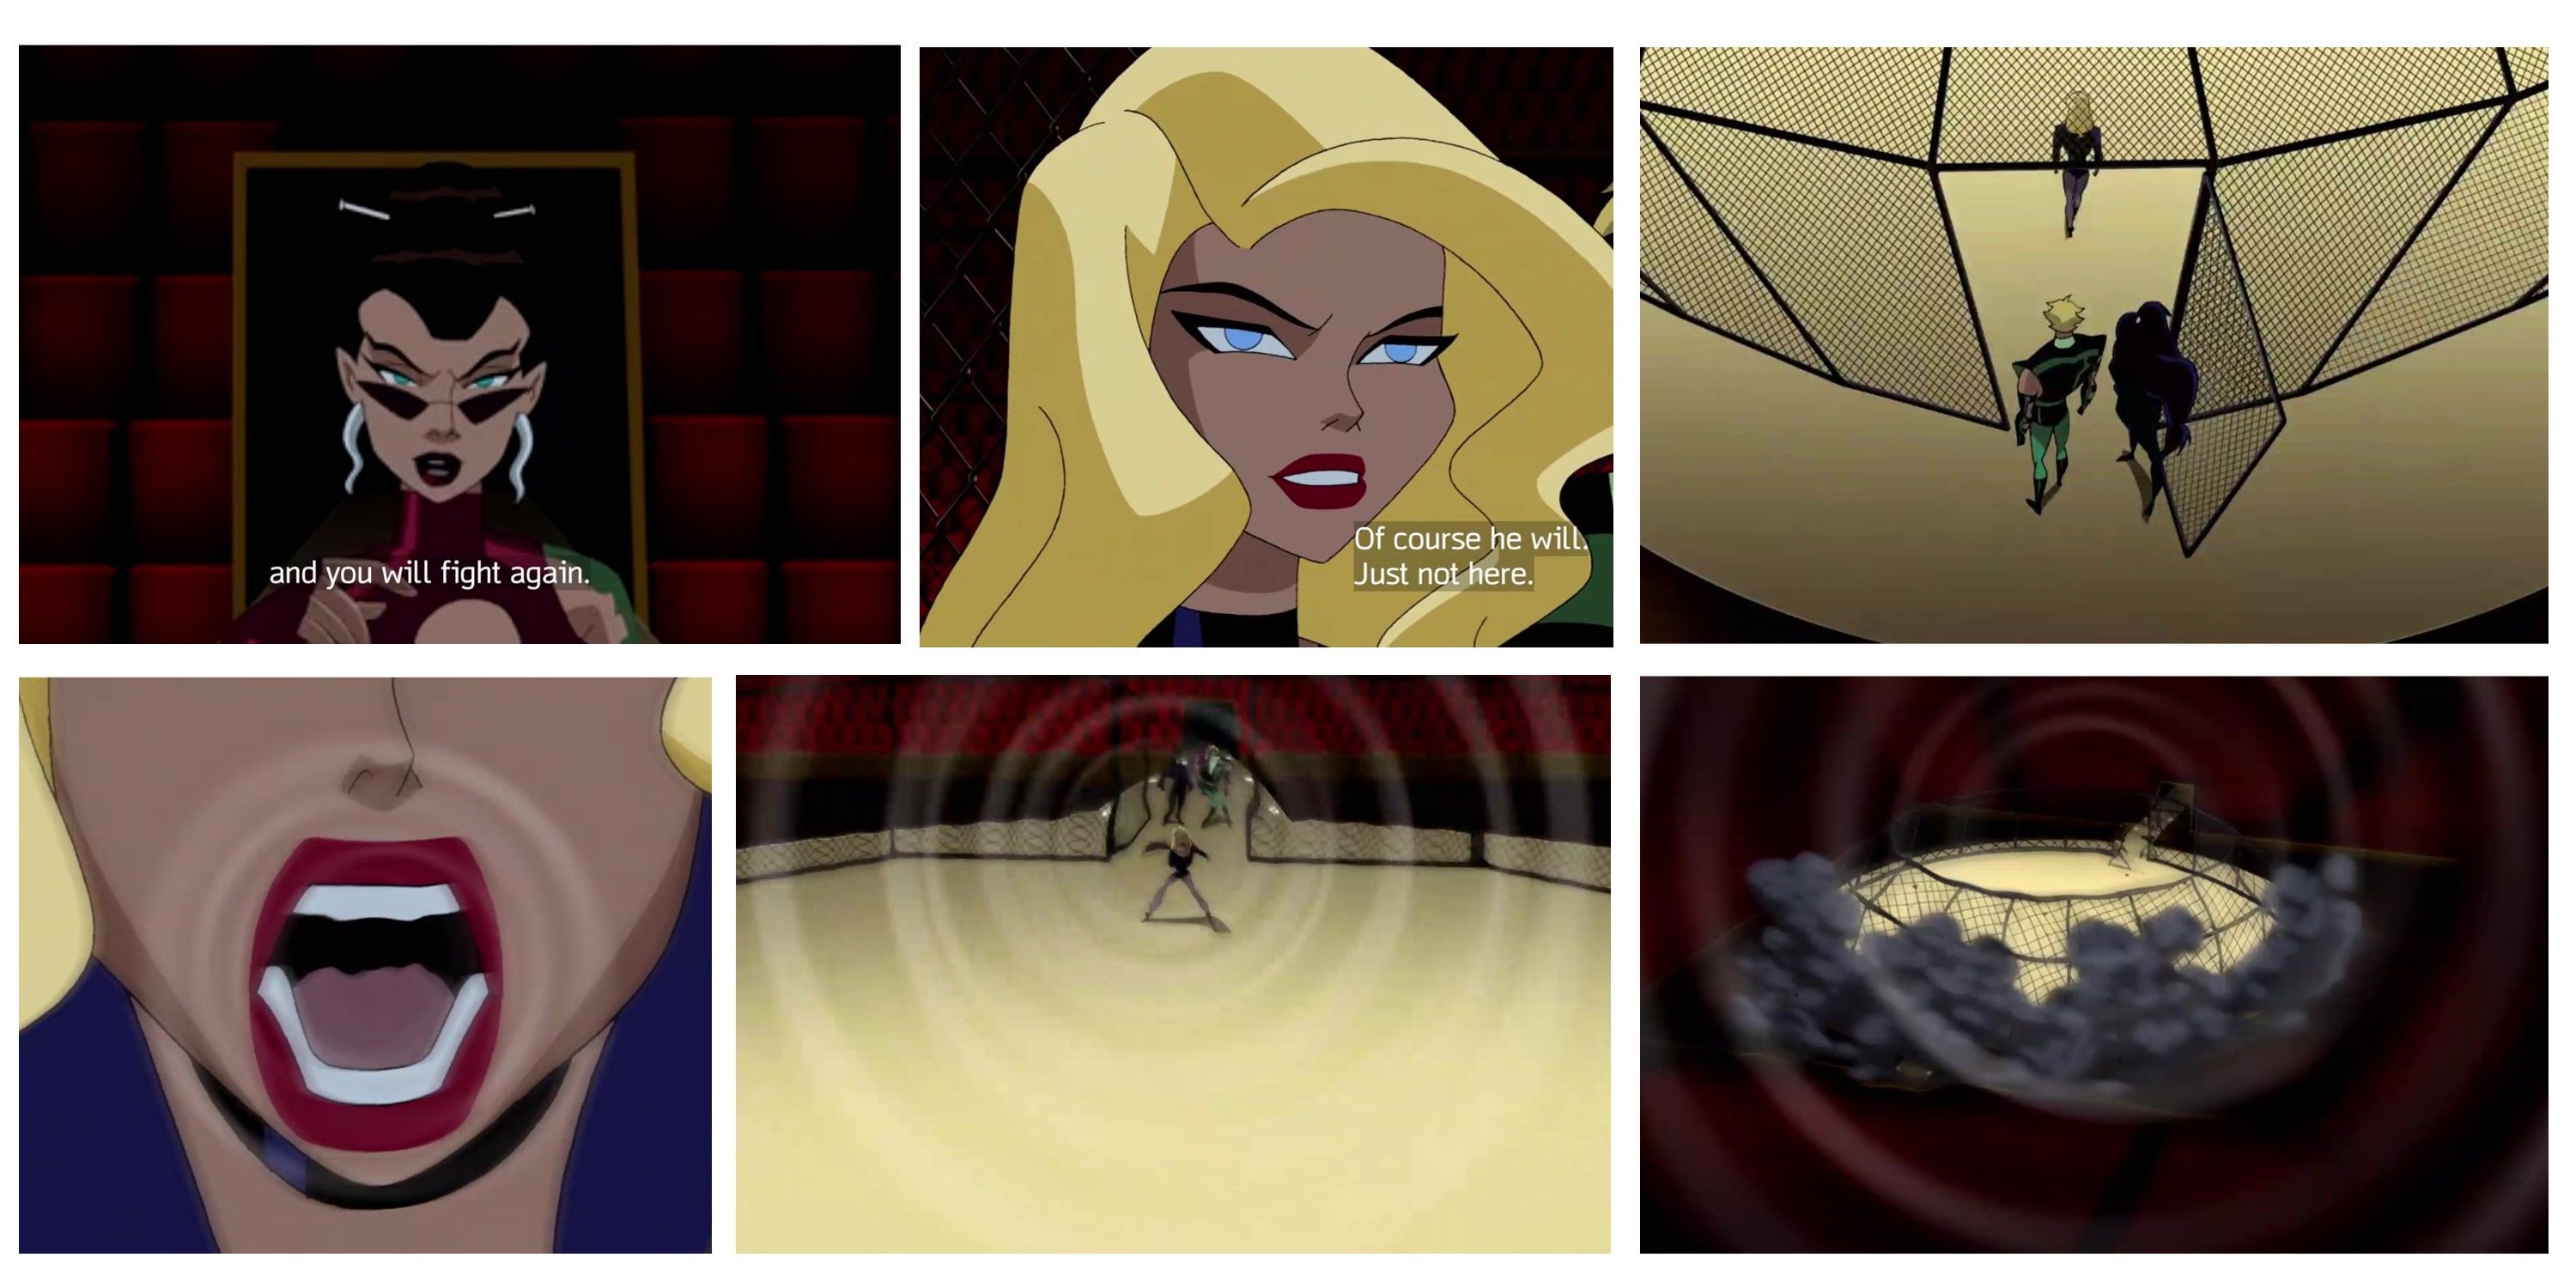 Black Canary pulls a building down in Justice League Unlimited